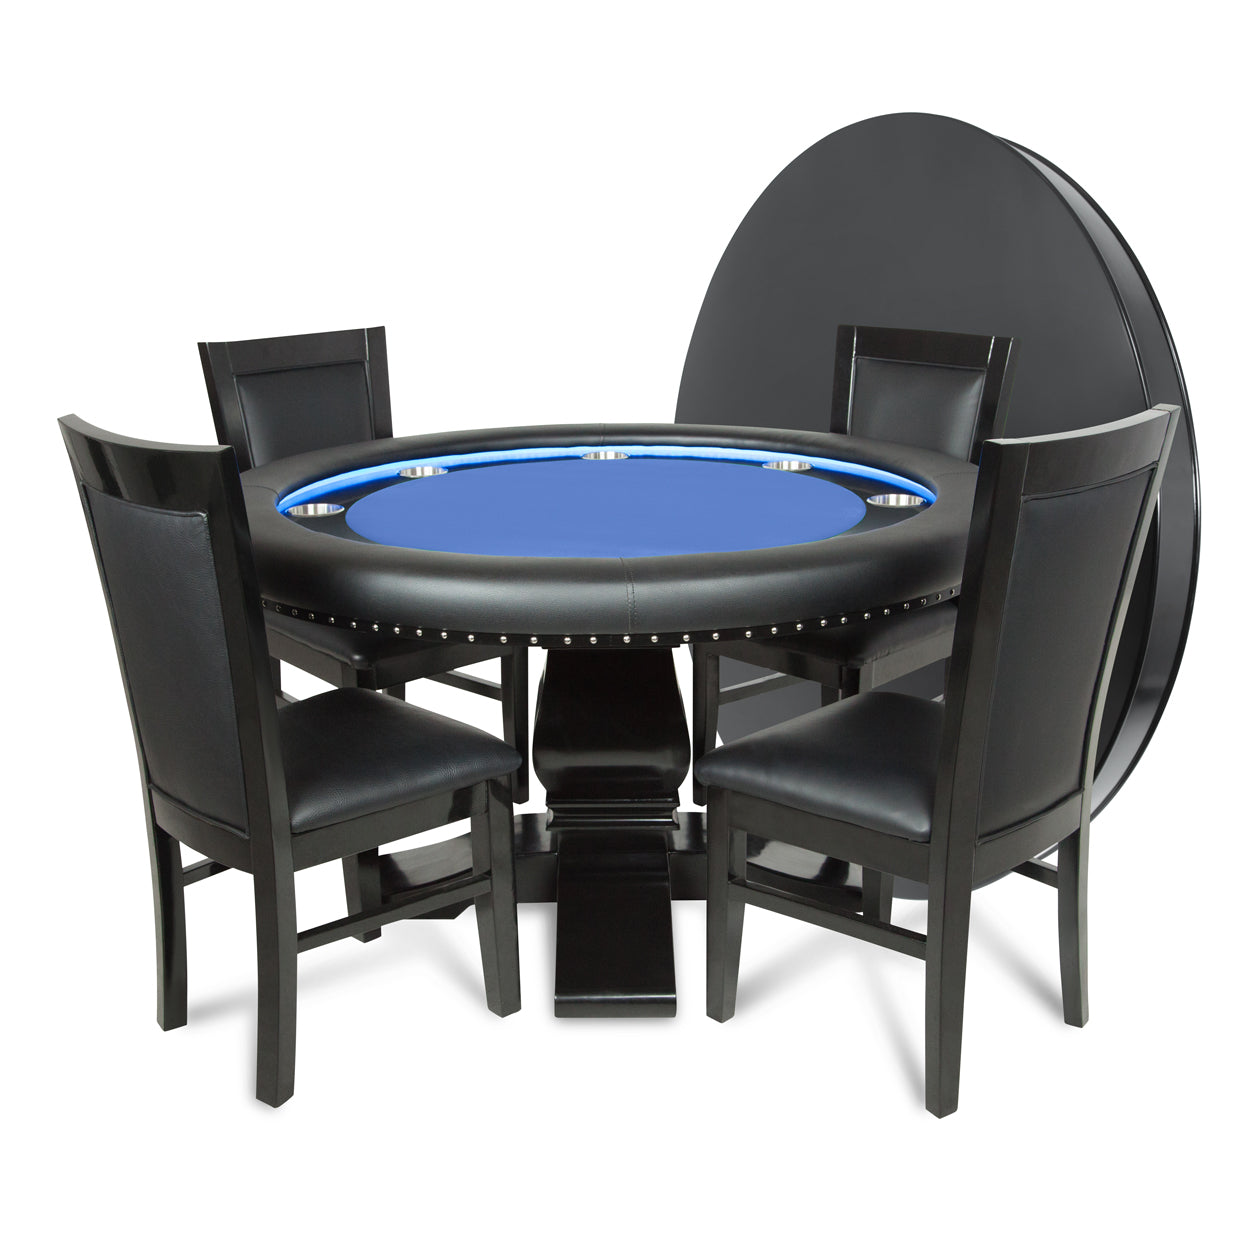 BBO The Ginza LED Premium Poker Table blue with dining top and chairs